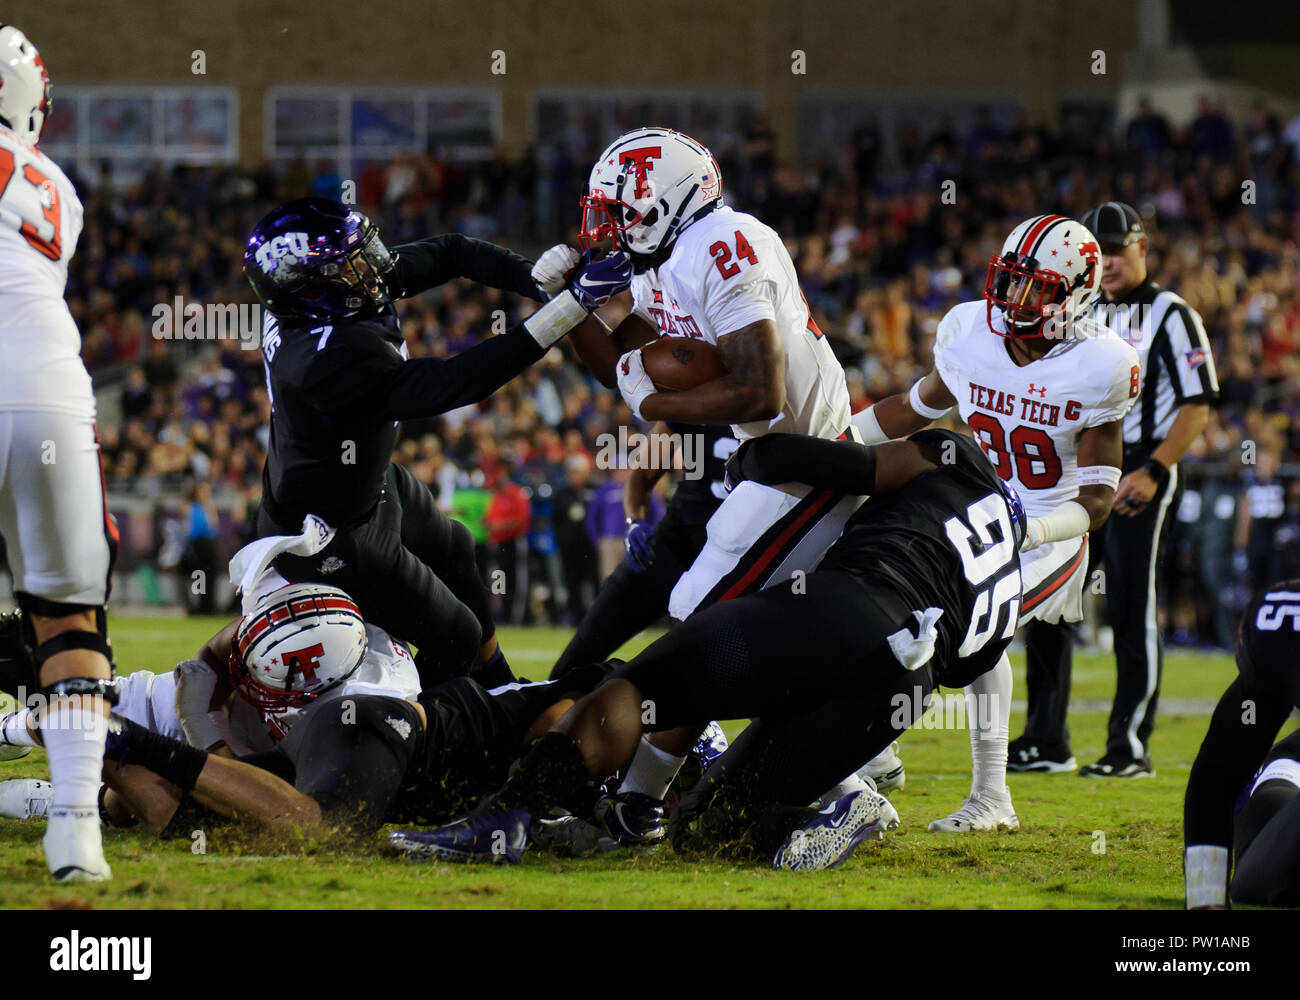 Waco, Texas, USA. 11th Oct, 2018. TCU Horned Frogs linebacker Arico Evans (7) and TCU Horned Frogs defensive end Dennis Collins (96) trying to tackle Texas Tech Red Raiders running back Tre King (24) during the 2nd half of the NCAA Football game between the Texas Tech Red Raiders Cyclones and the TCU Horned Frogs at Amon G. Carter in Waco, Texas. Matthew Lynch/CSM/Alamy Live News Stock Photo